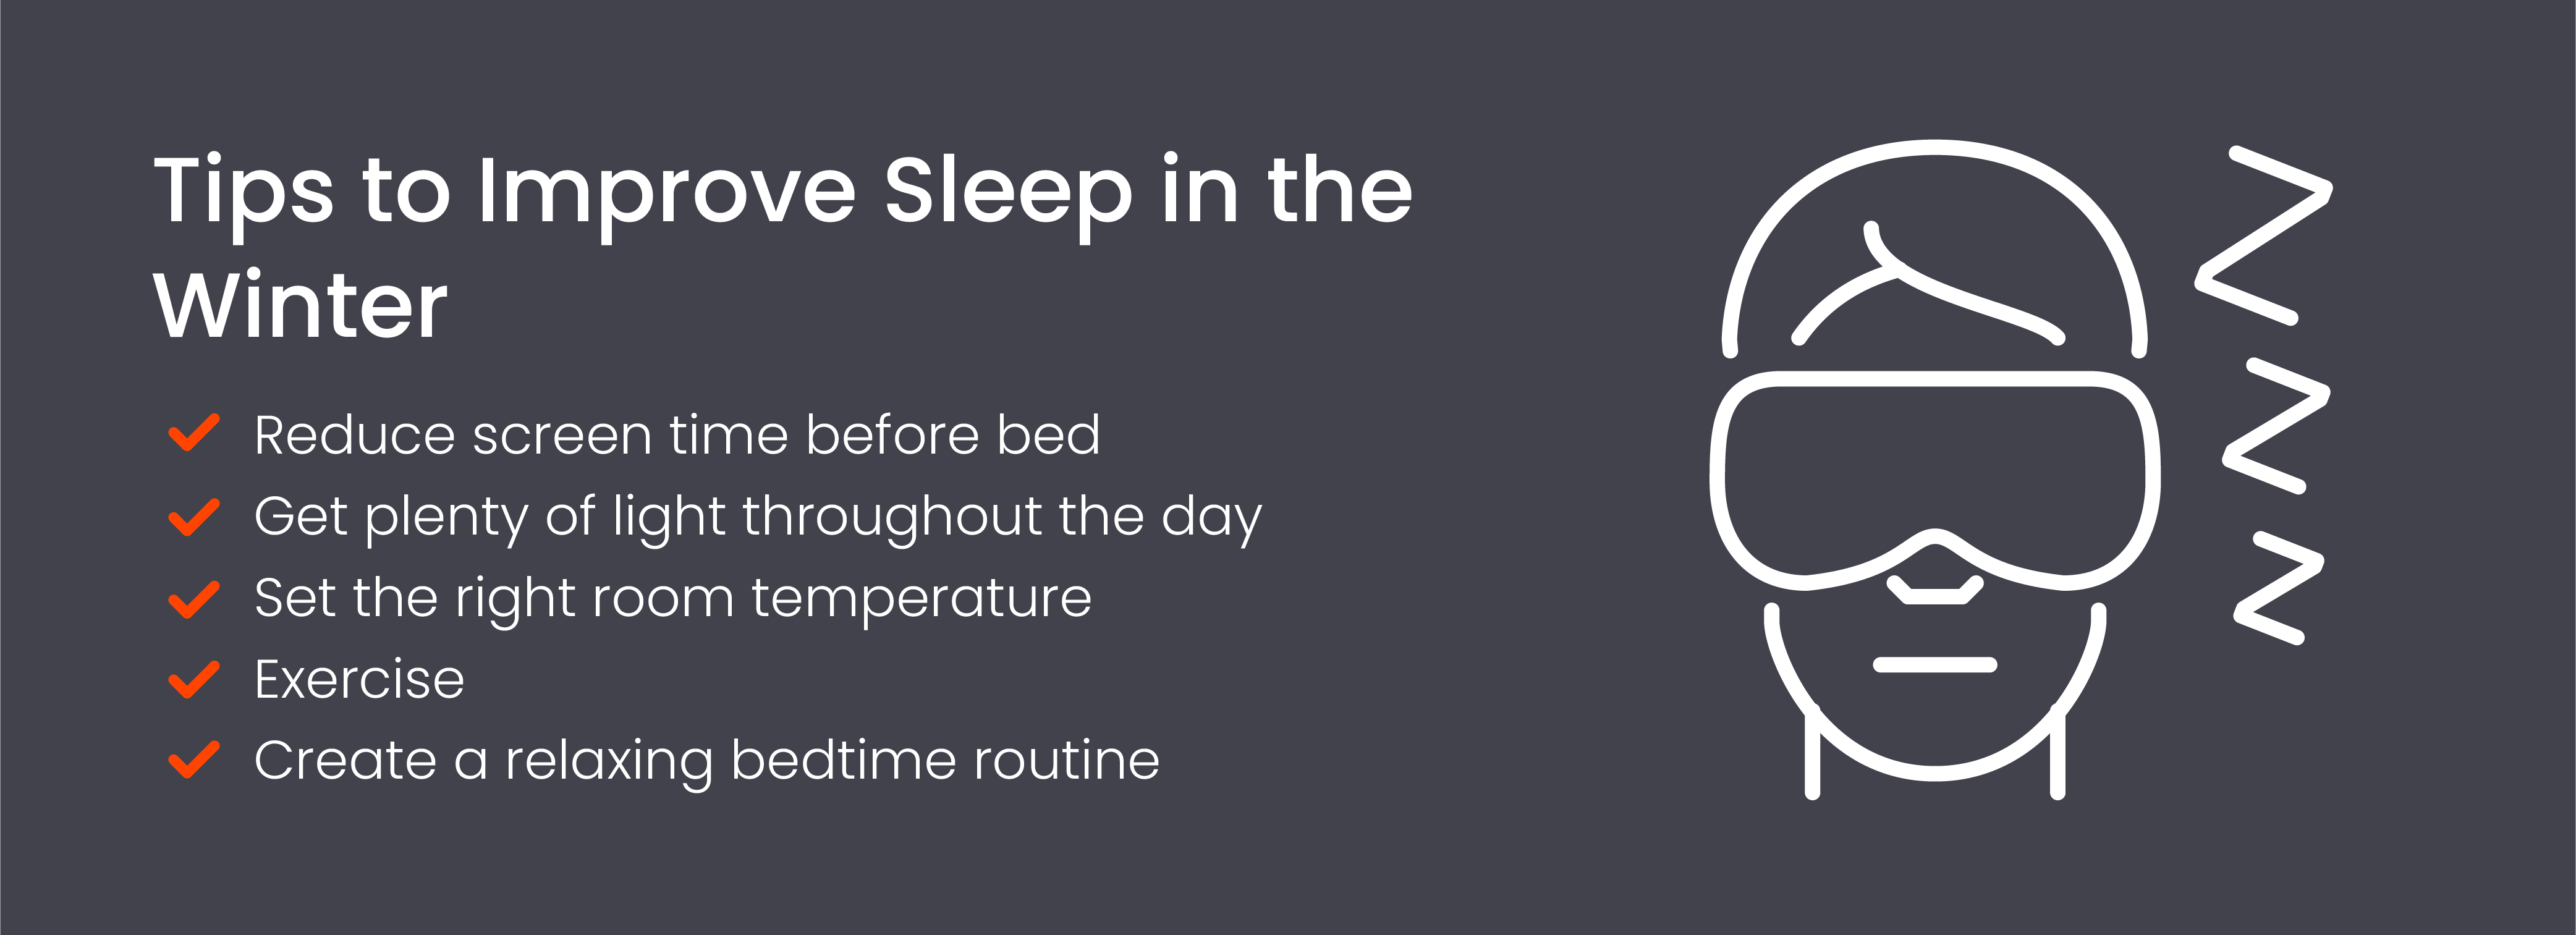 Tips to improve sleep in the winter